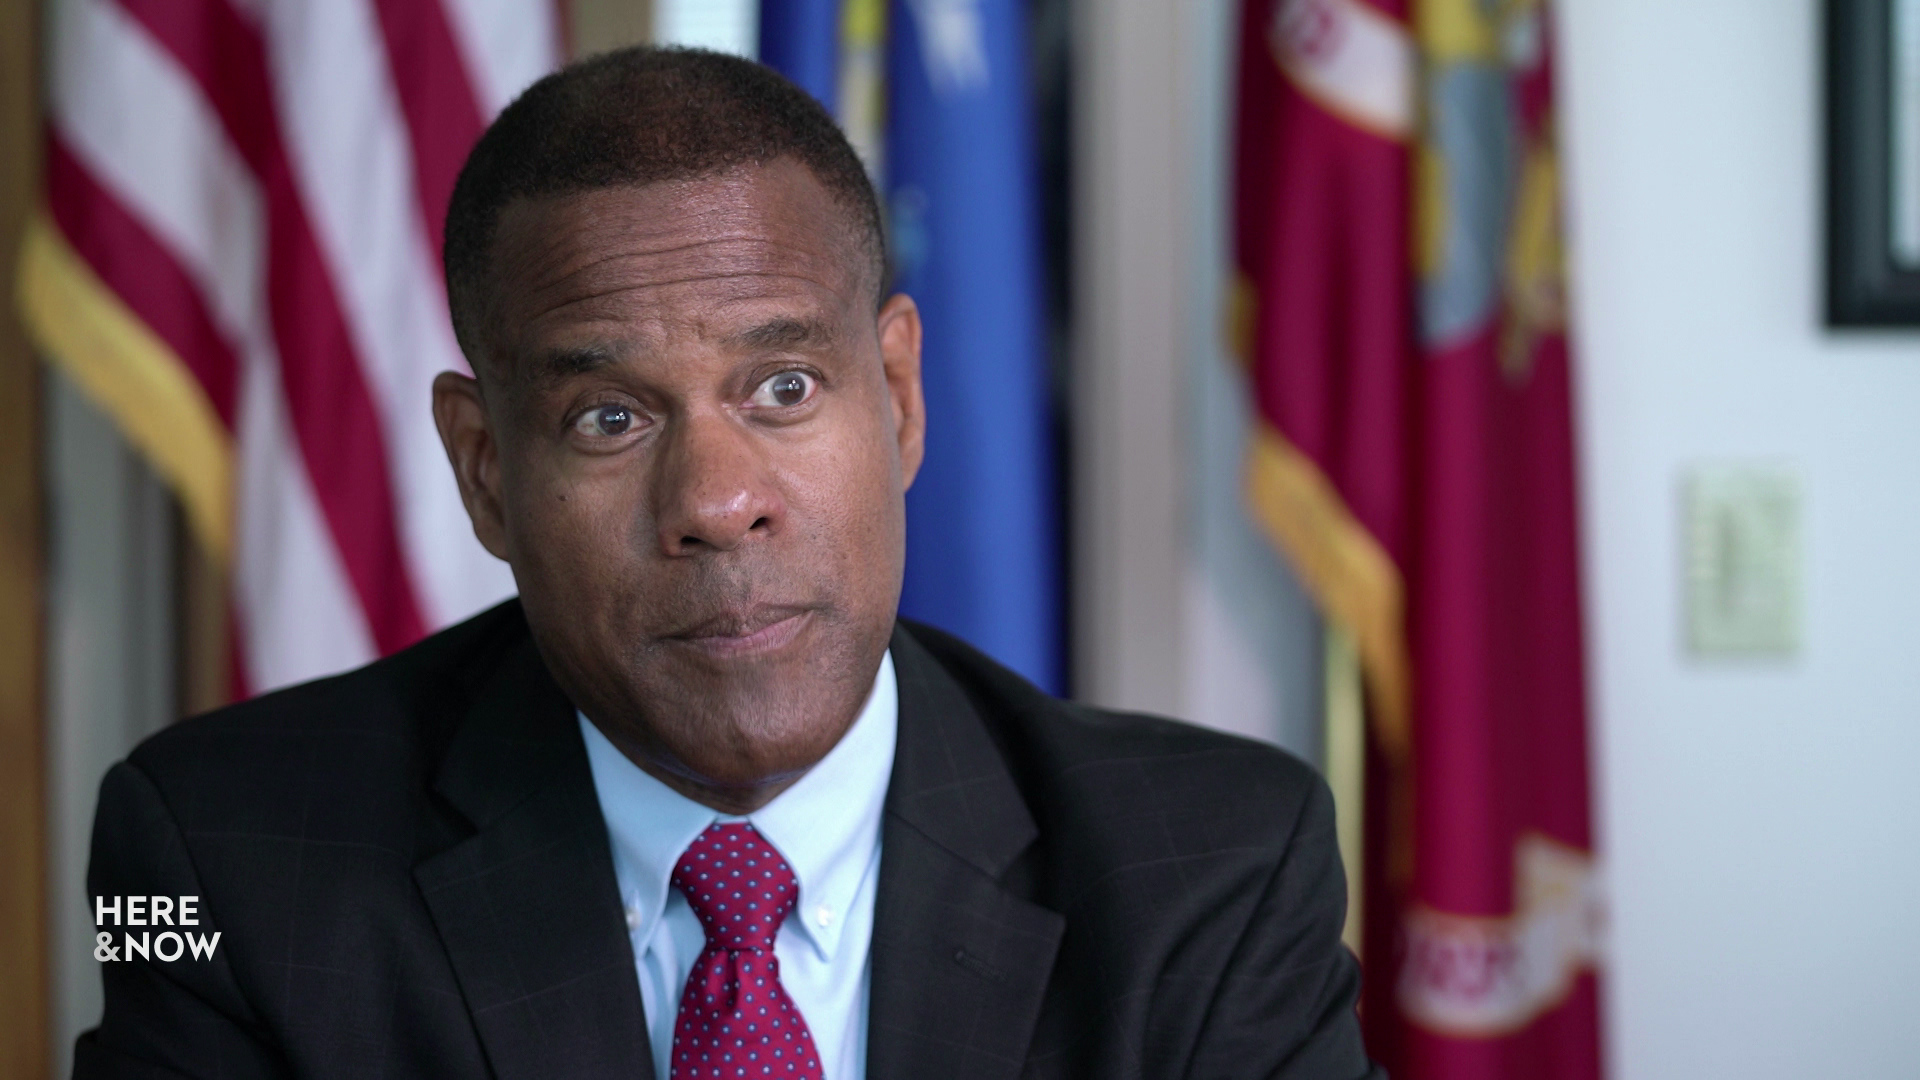 A still image from an interview shows James Bond sitting in a room with the U.S. and U.S. Armed Forces branch flags in the background.